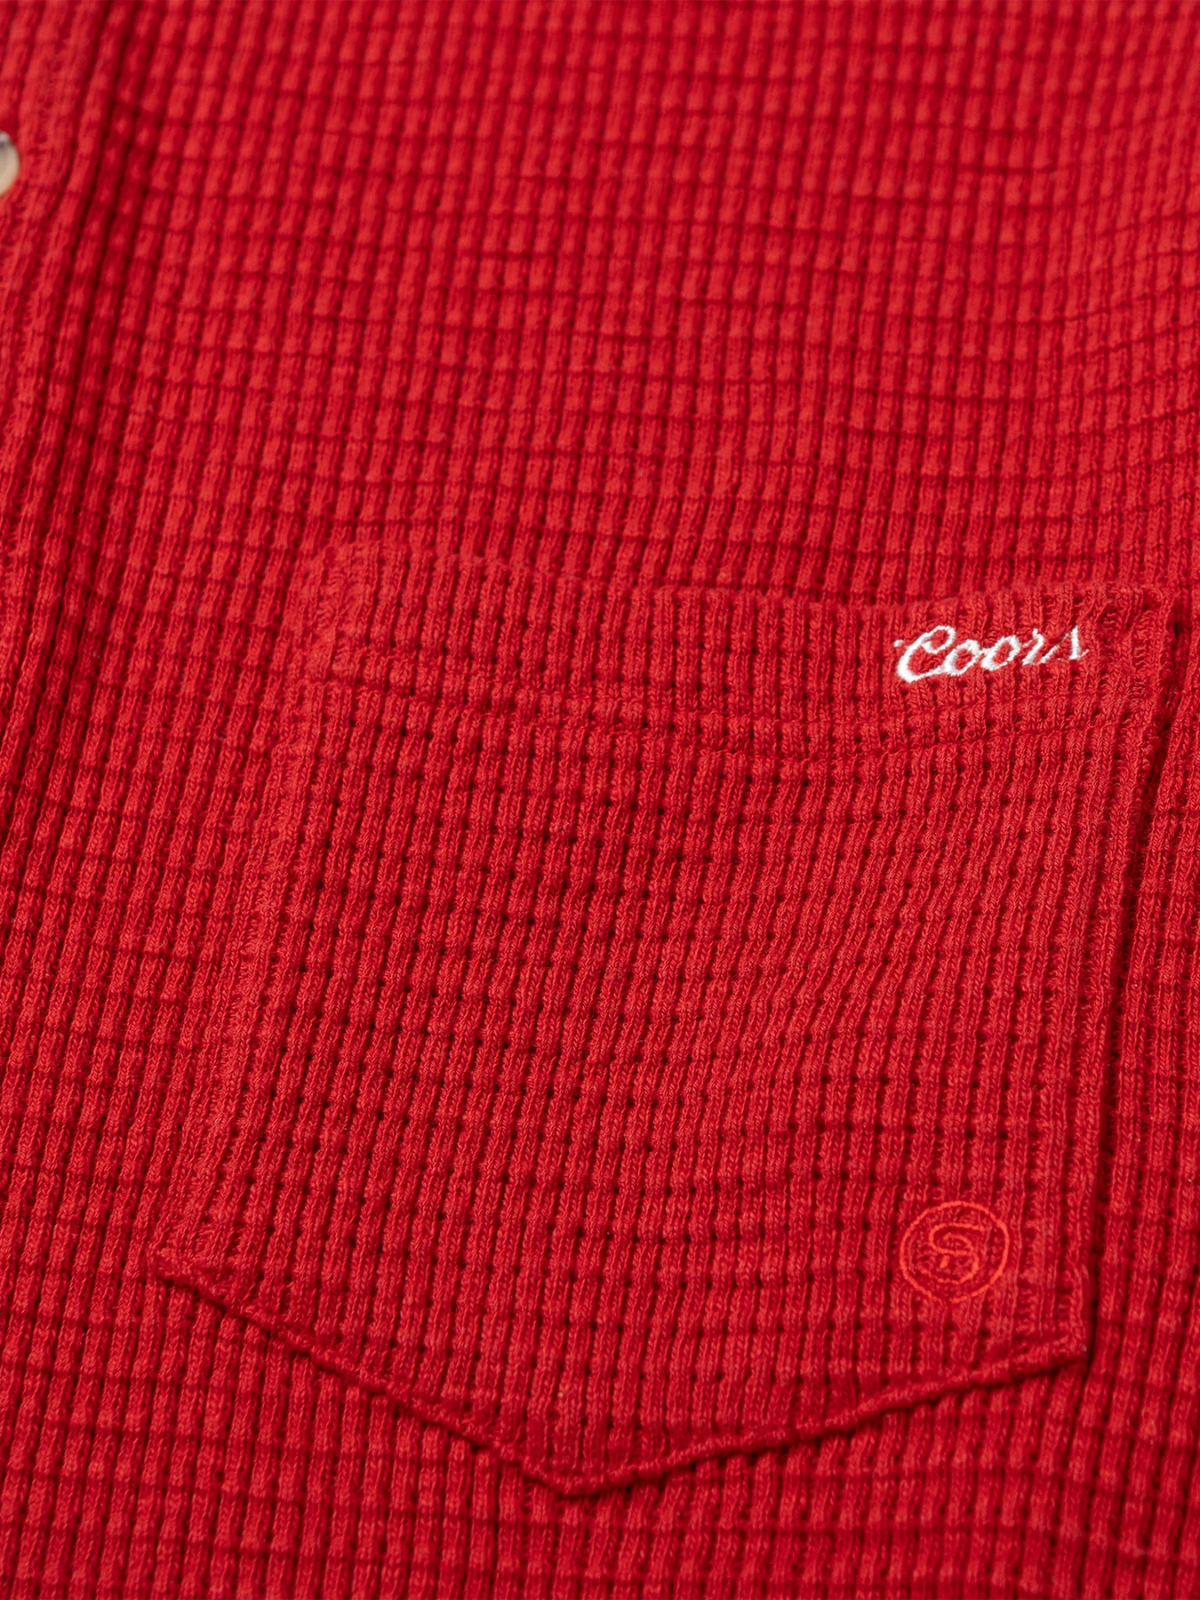 seager coors banquet beer collaboration celebrating 150 years of the brand sawpit ls long sleeve henley thermal waffle knit sweater t-shirt tee red kempt athens ga georgia men's clothing store